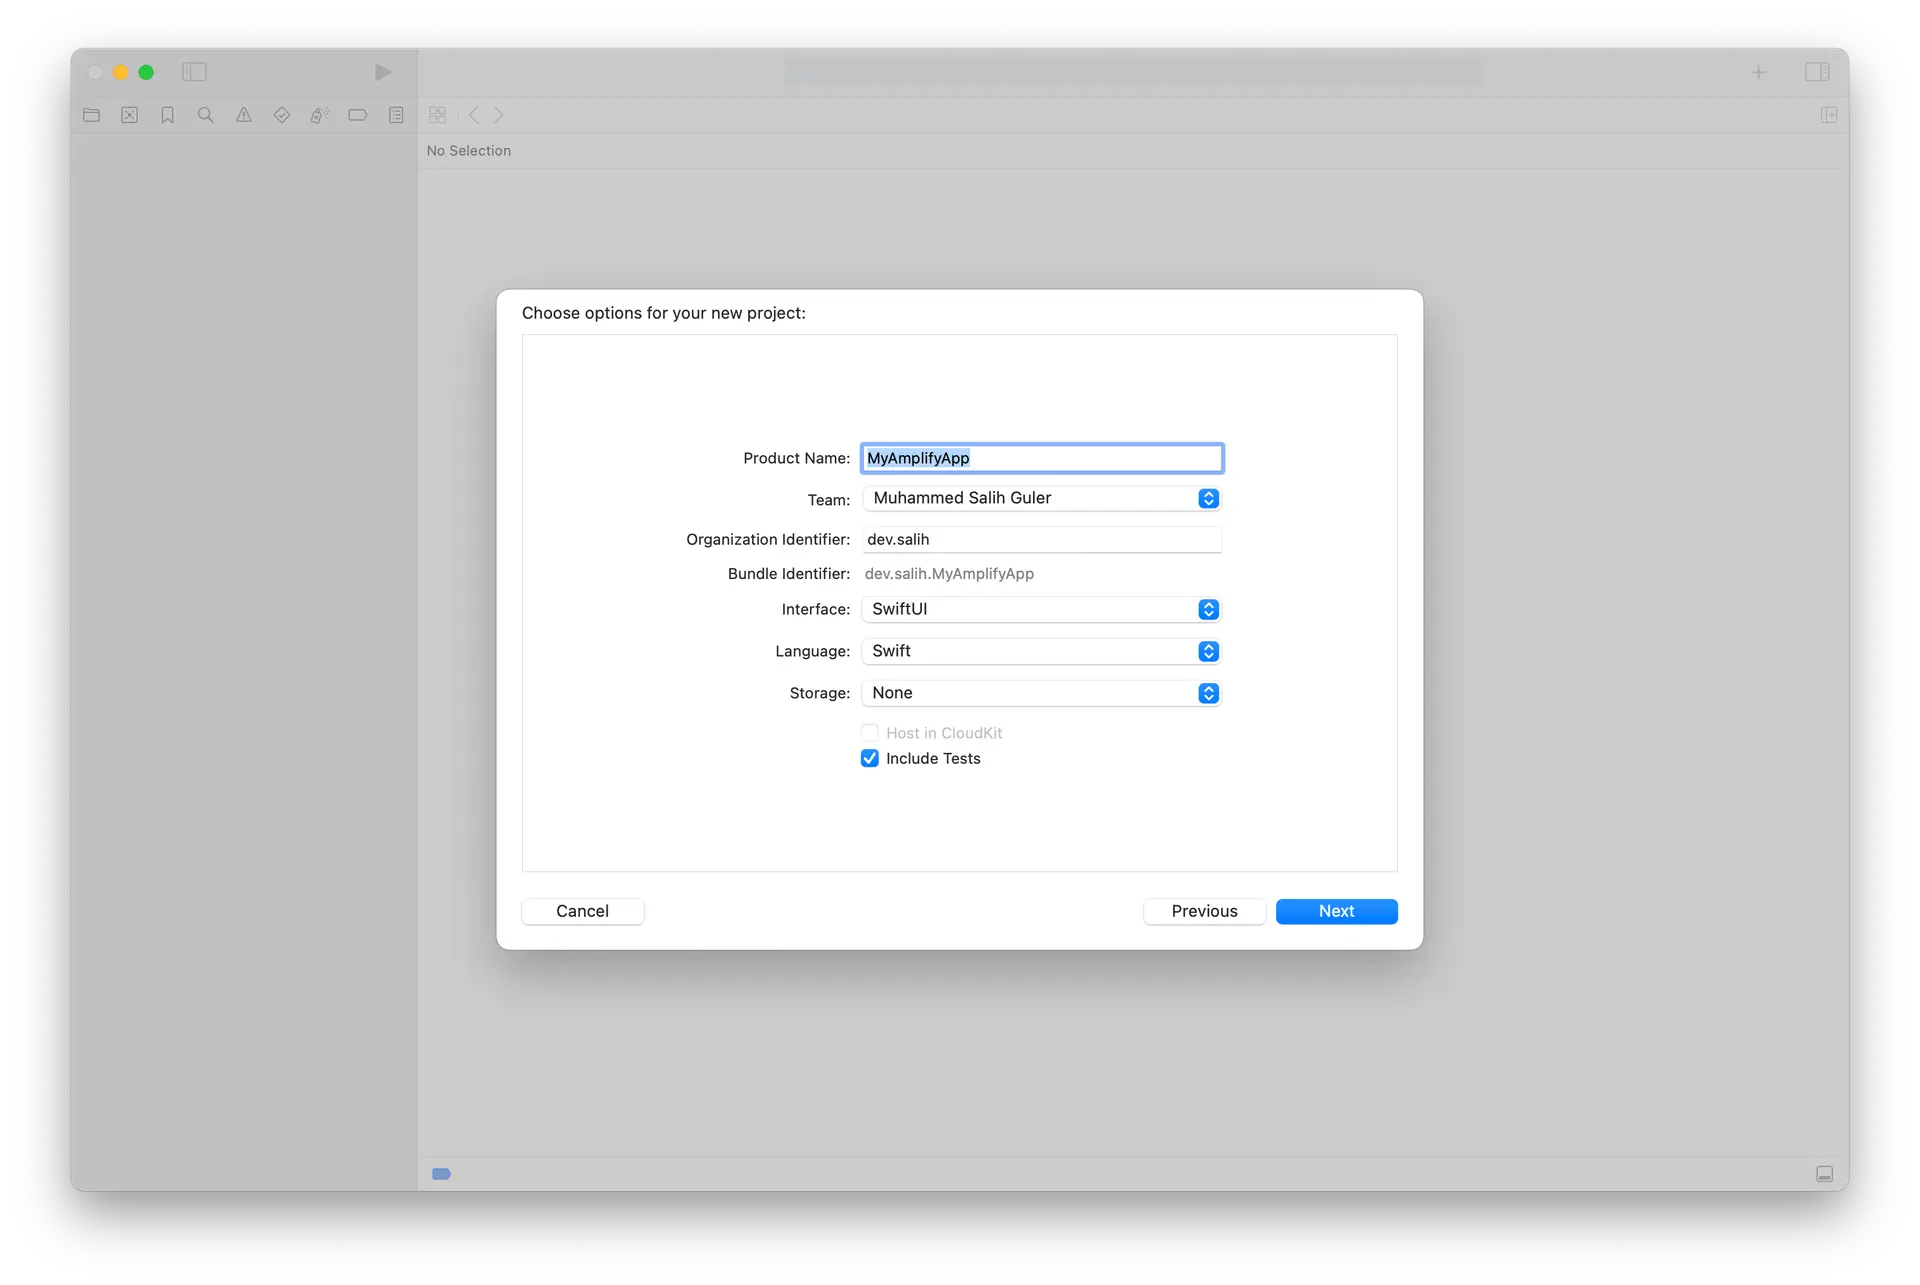 Shows the project details dialog